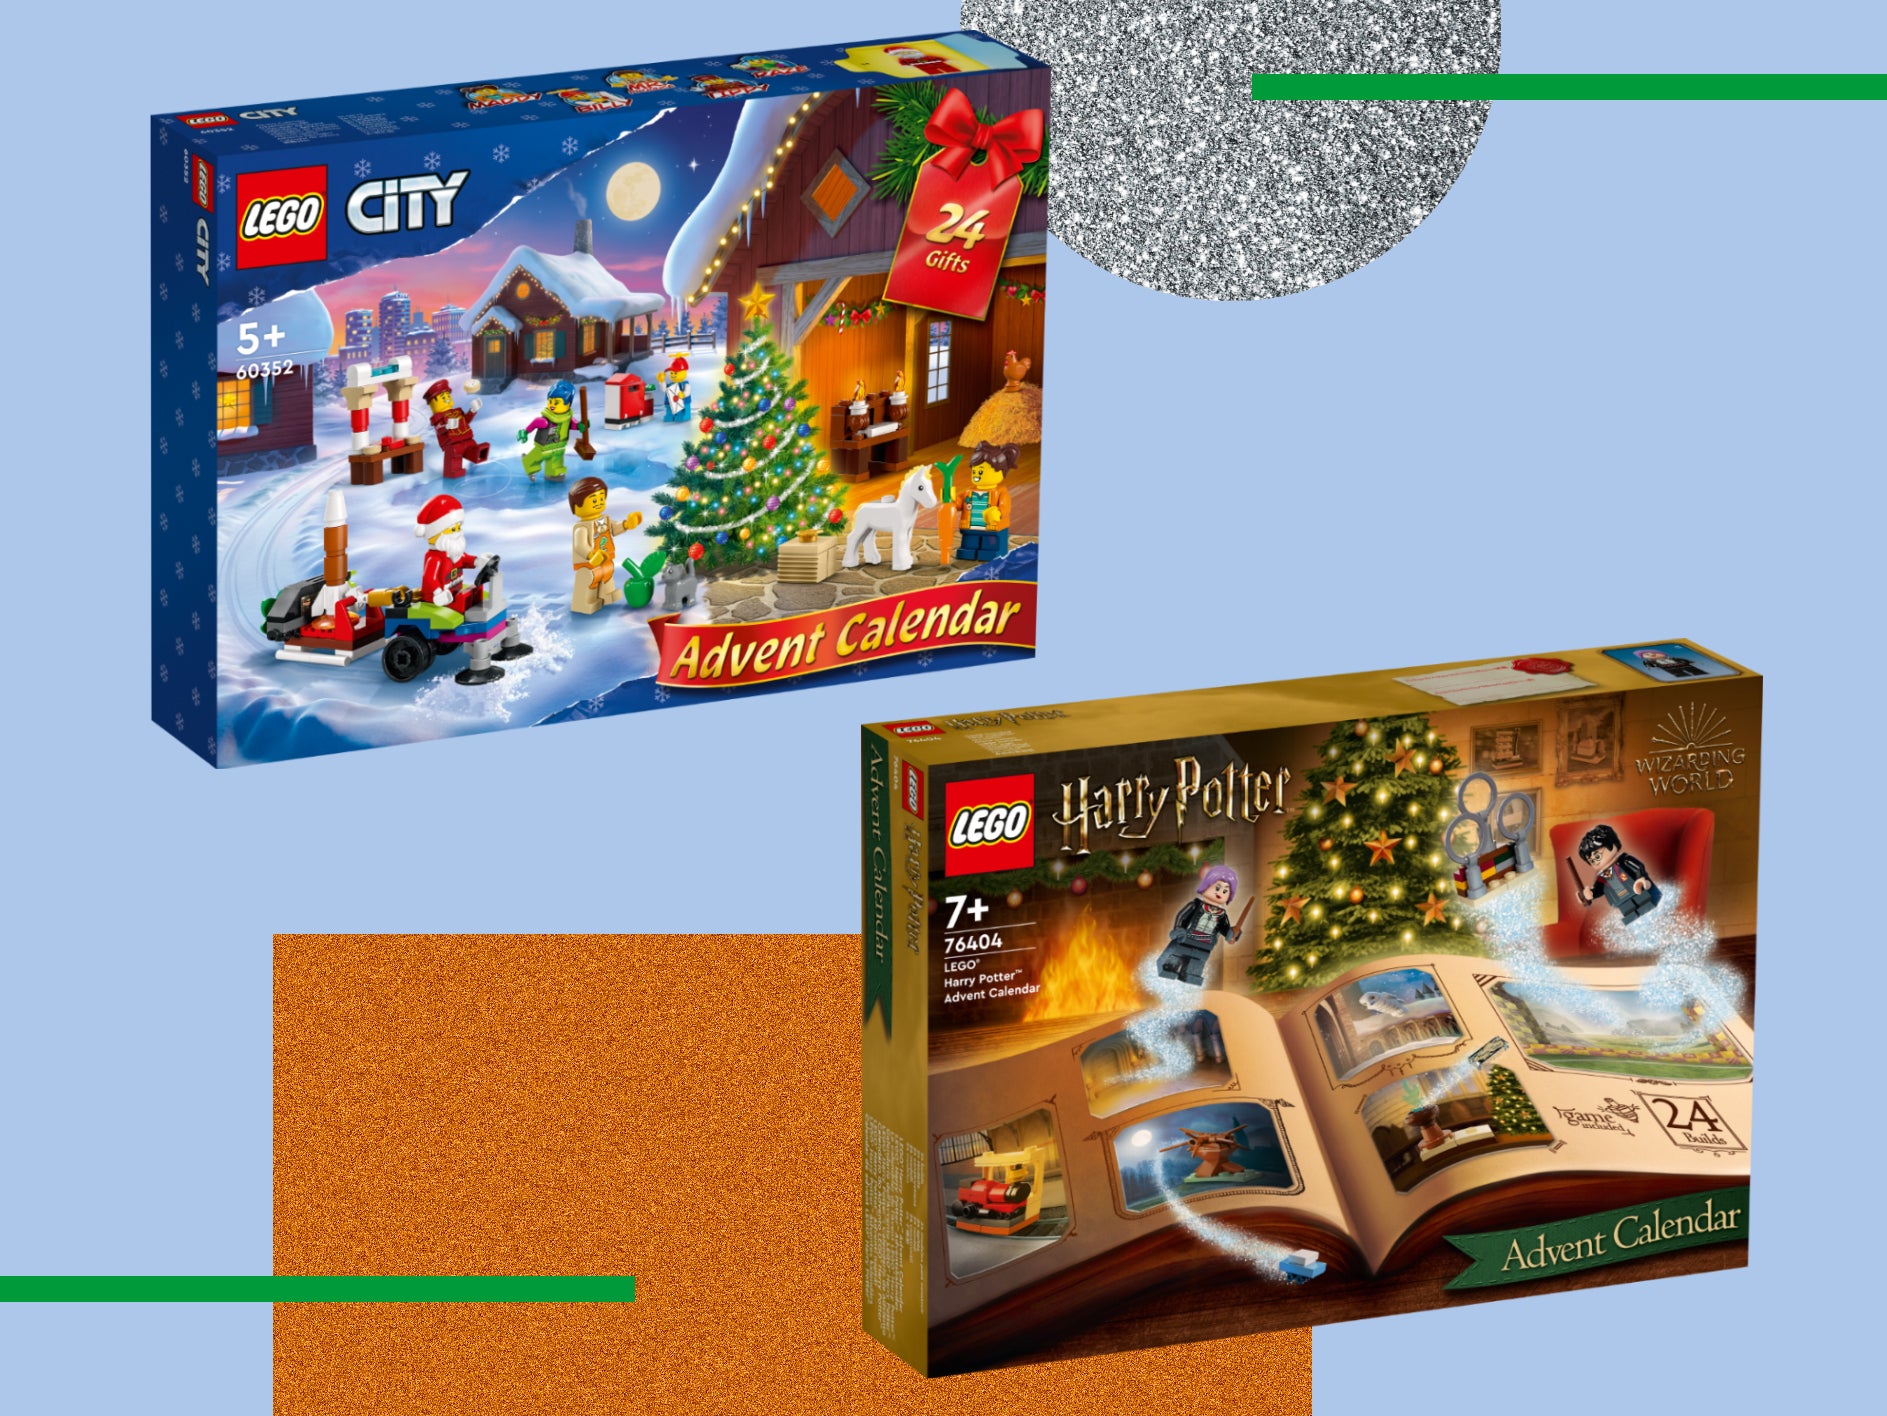 Lego’s advent calendars are sure to build the excitement for Christmas